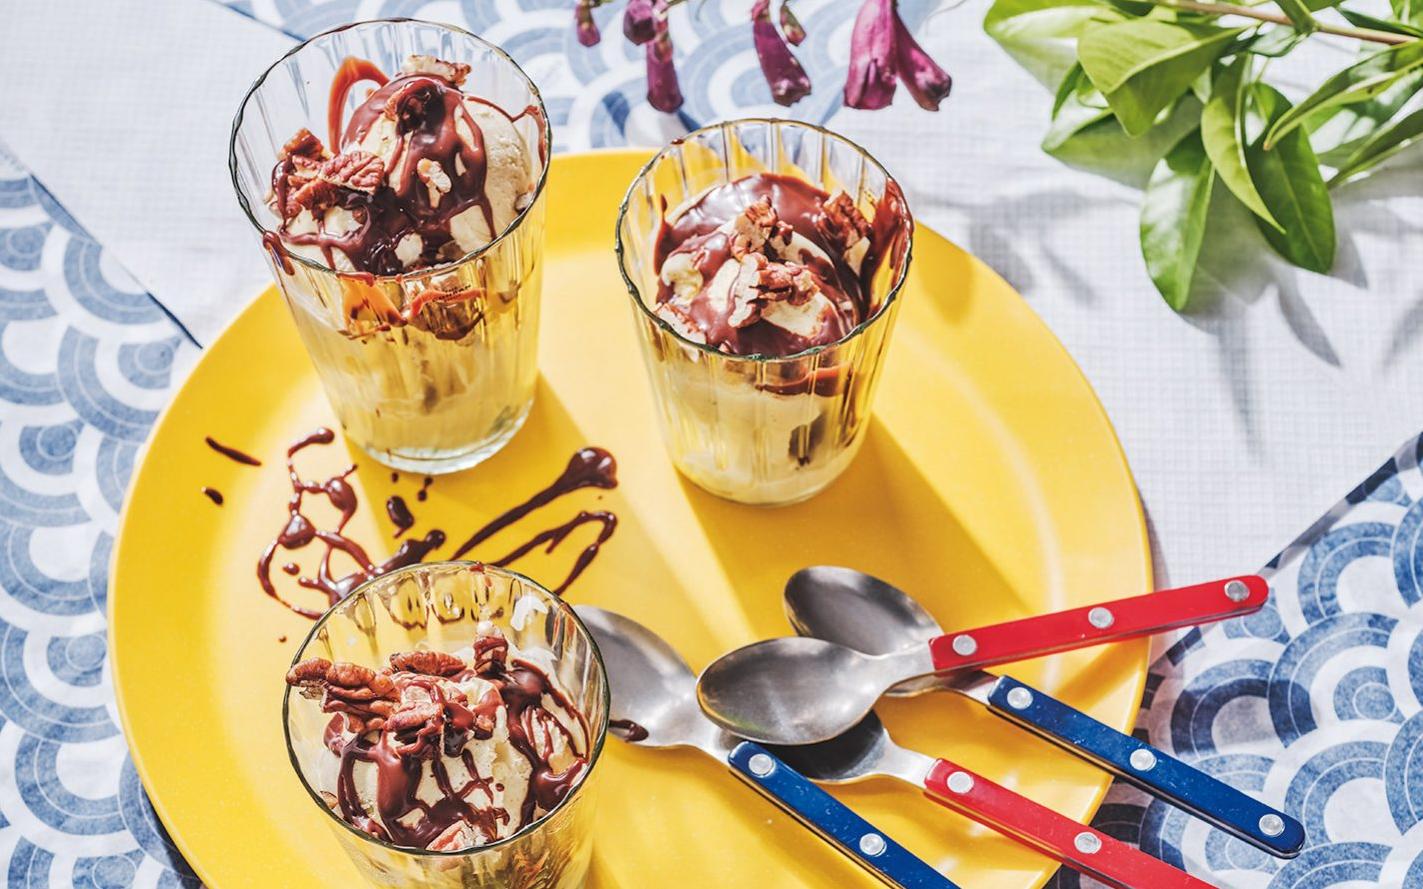  Don't be afraid of the spice - it's what makes this sundae truly special.